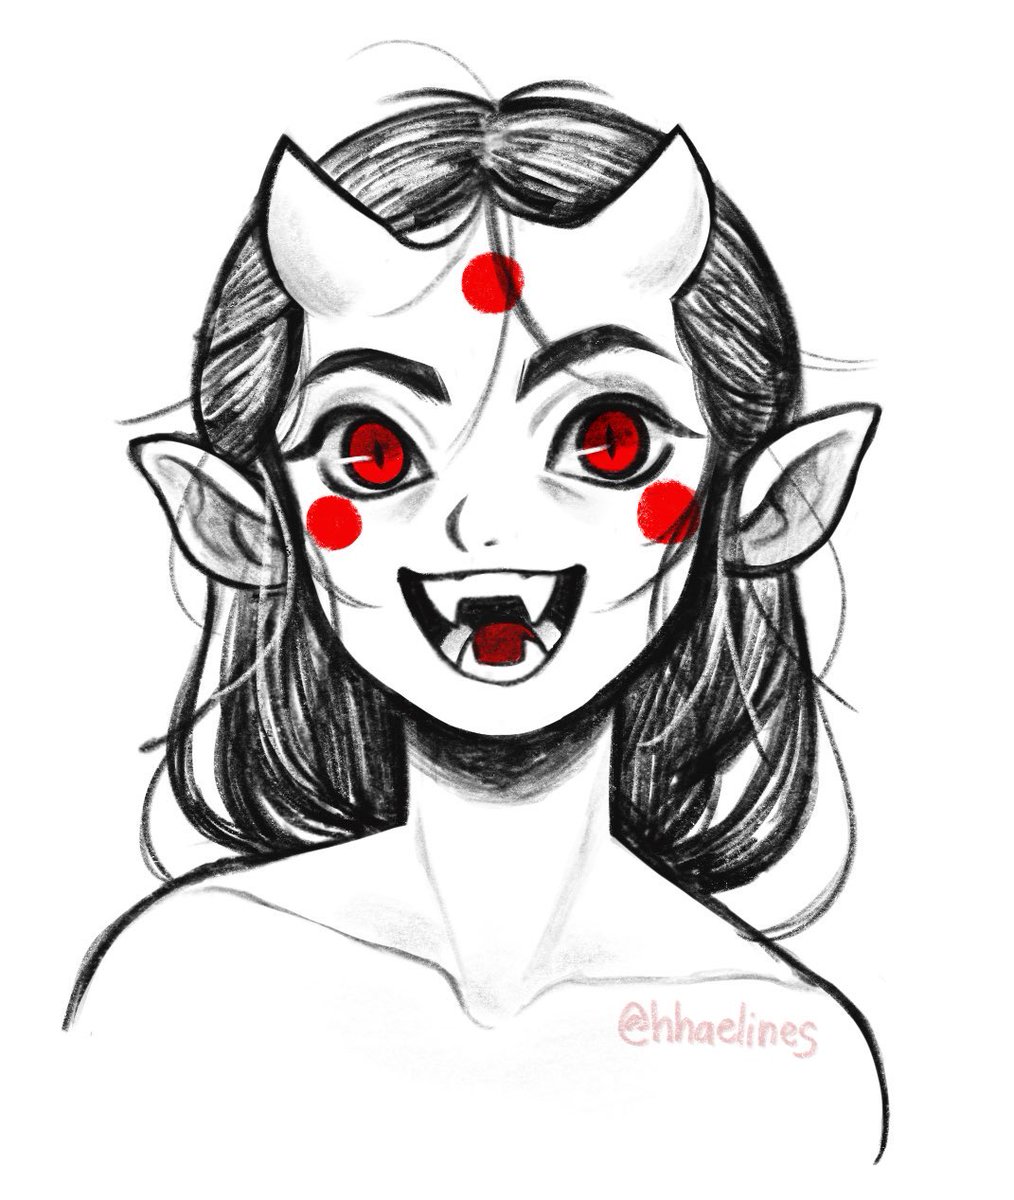 tokki needs more love tbh i need to draw my goblin girl... 